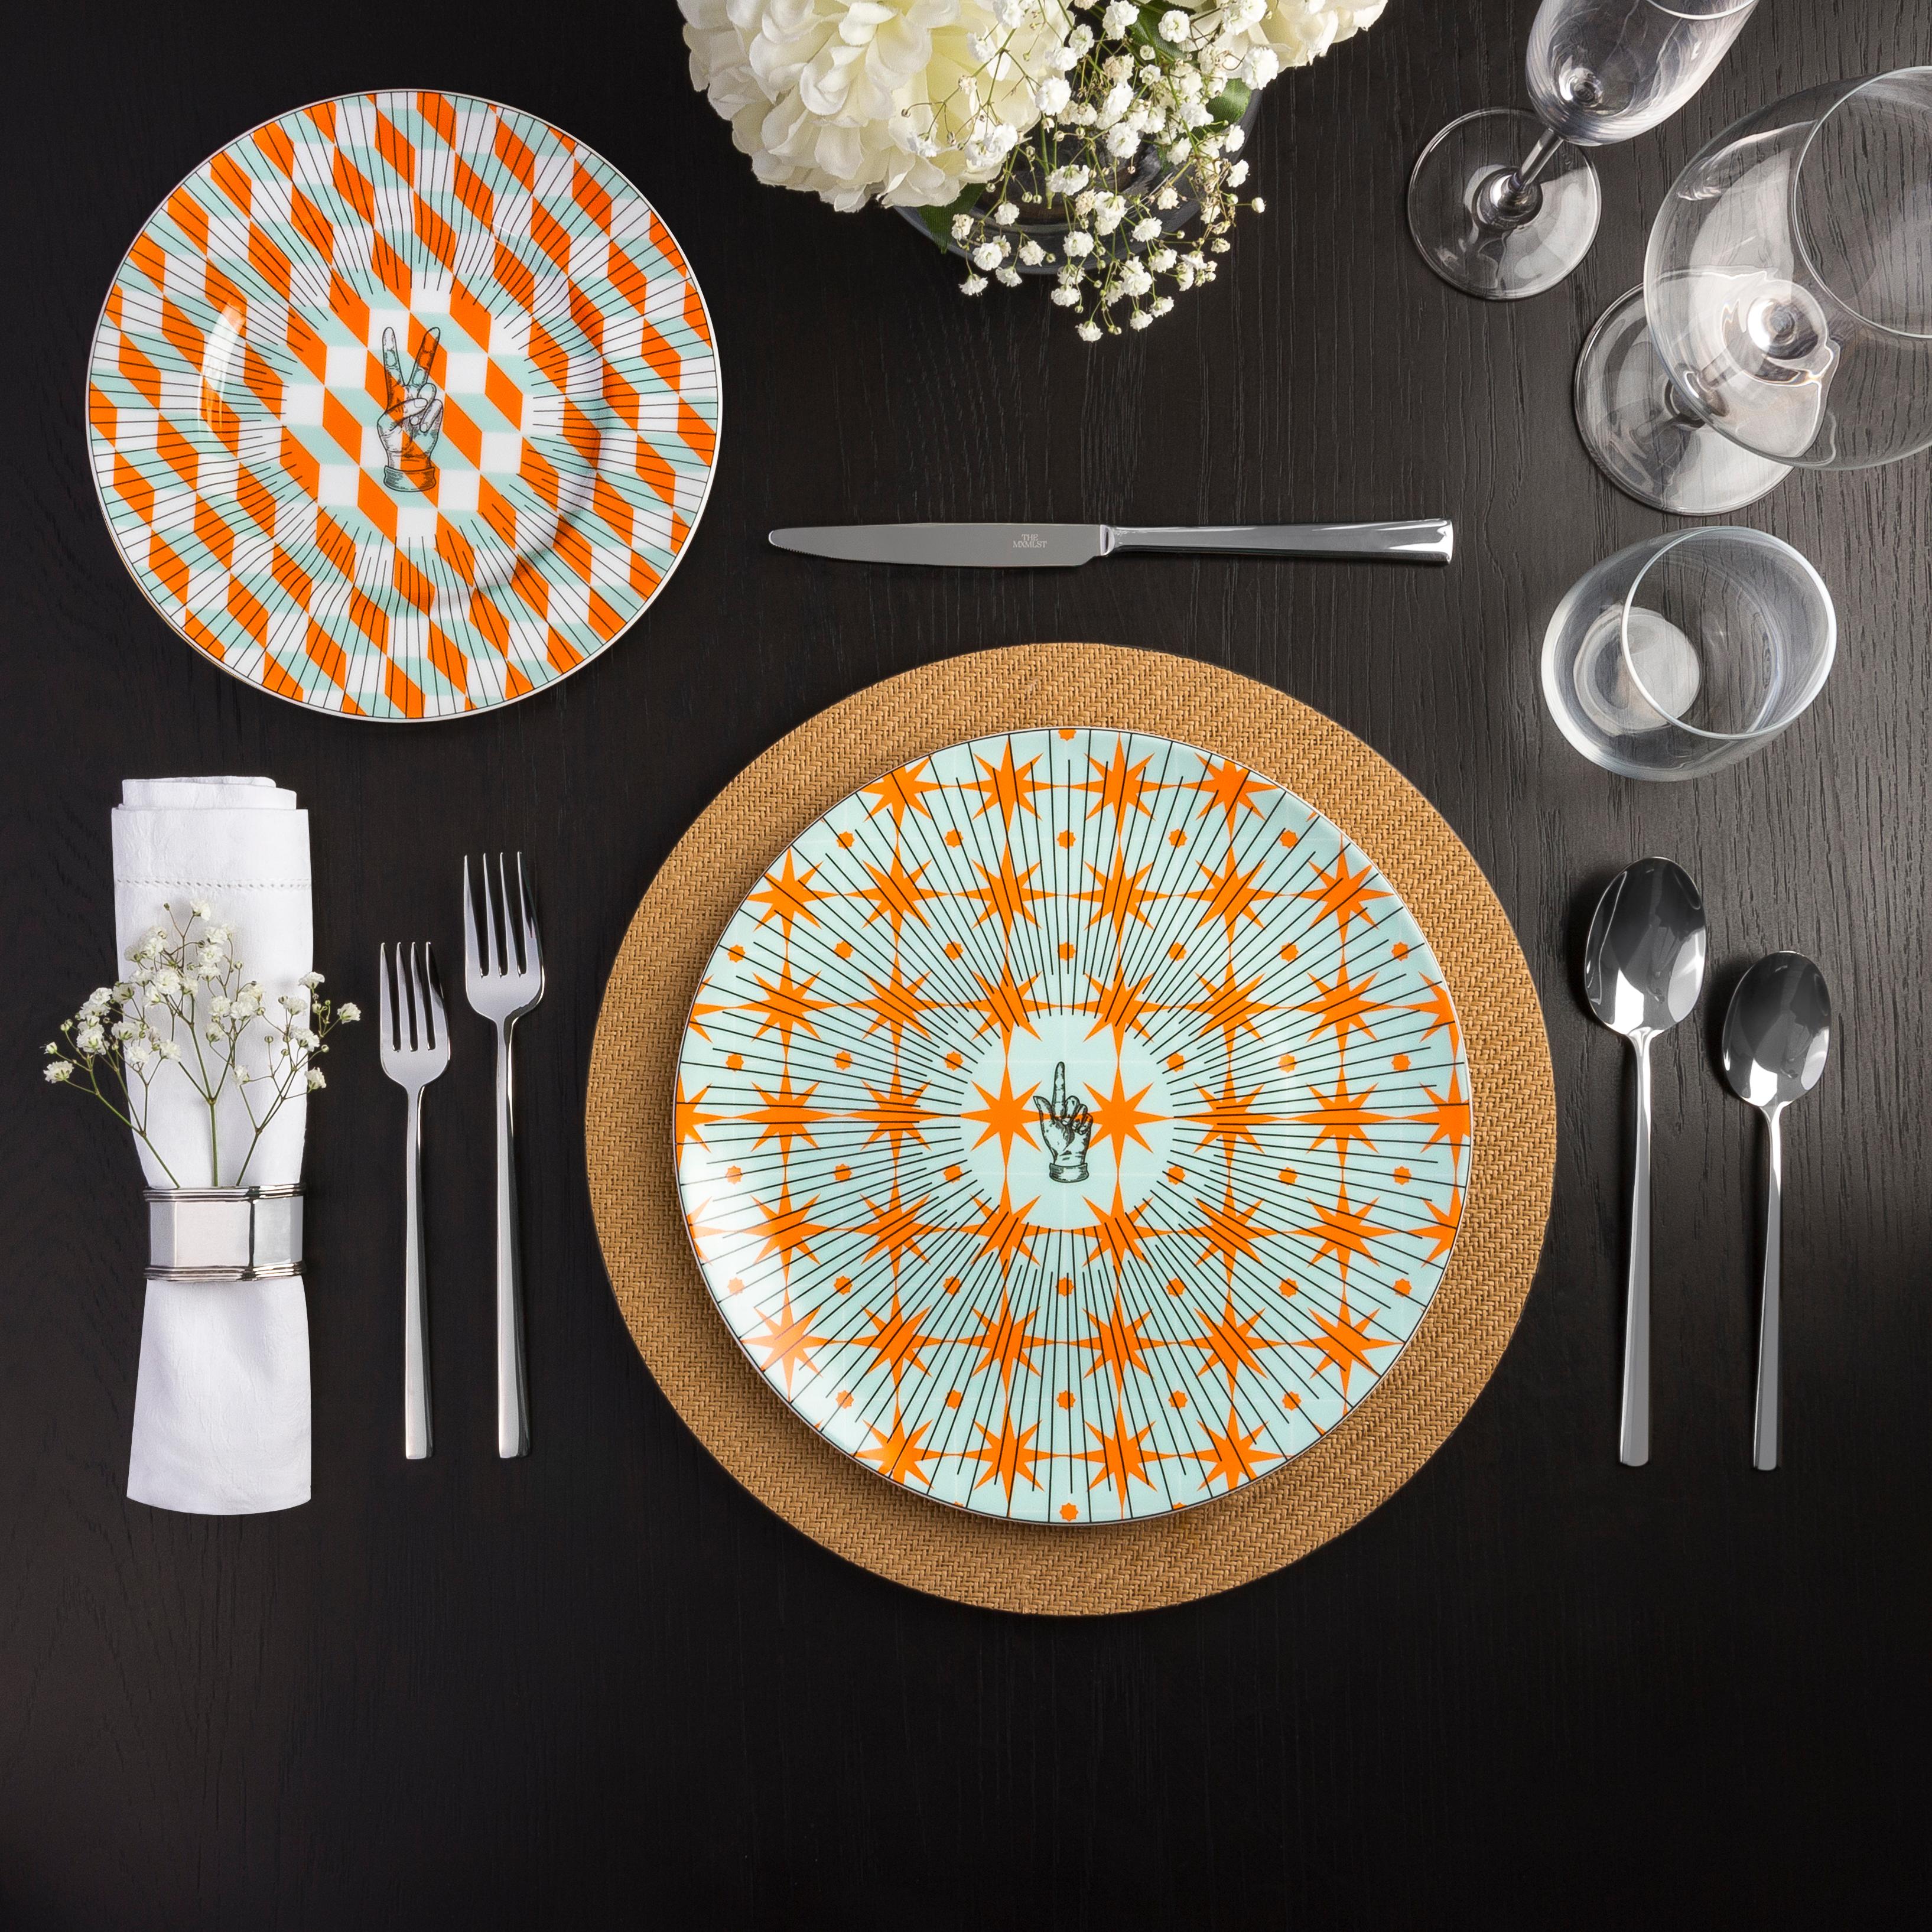 Inspired by the geometric patterns featured in Portuguese tiles, the Les Clément Dinner will add a layer of cool-ness to your dinner table. Dynamic black lines that lead up to the hand motifs bring a sense of playfulness that will surely enlighten